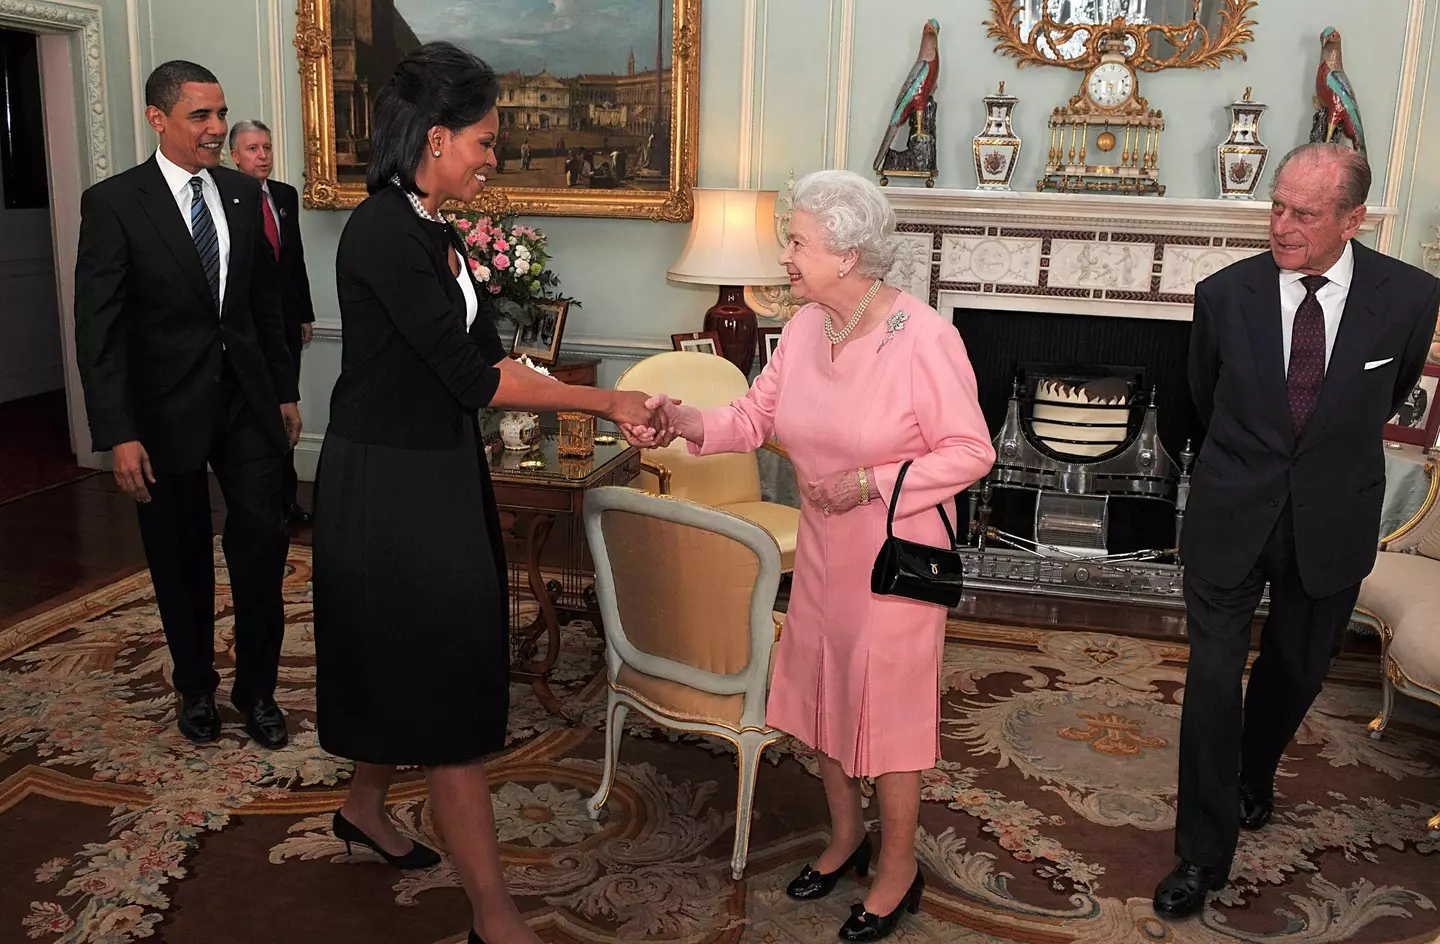 Michelle Obama met the Queen a number of times. (JOHN STILLWELL/AFP via Getty Images)